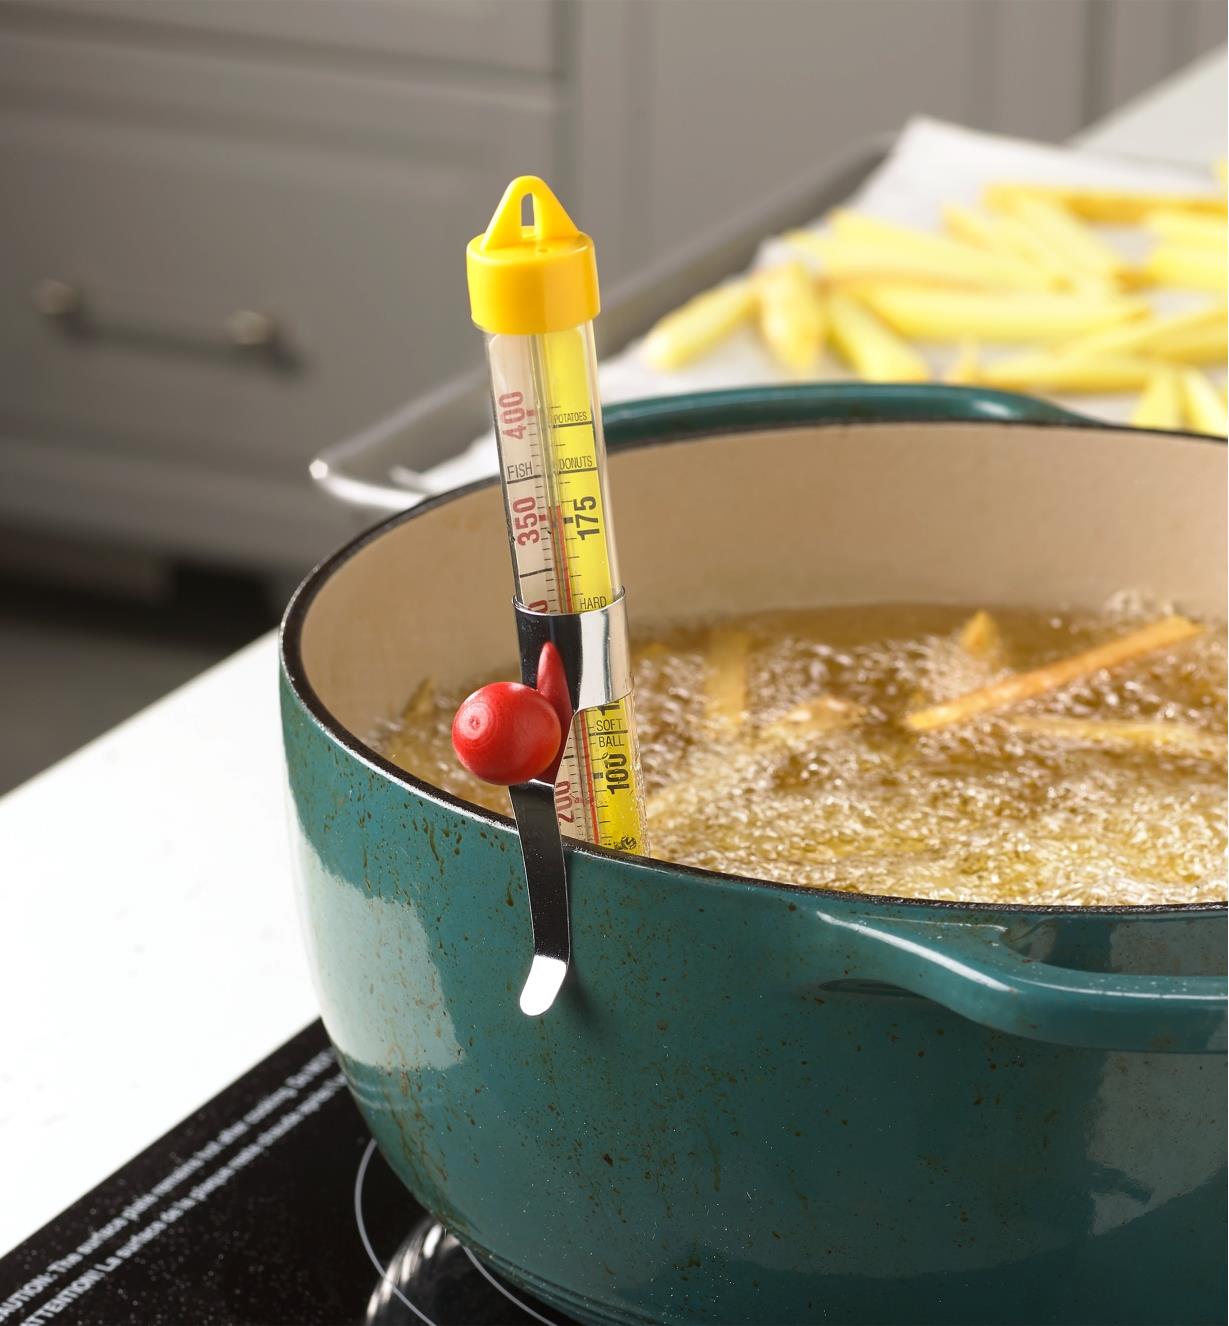 The candy and deep-fry thermometer clipped to a pot of deep-frying potato strips